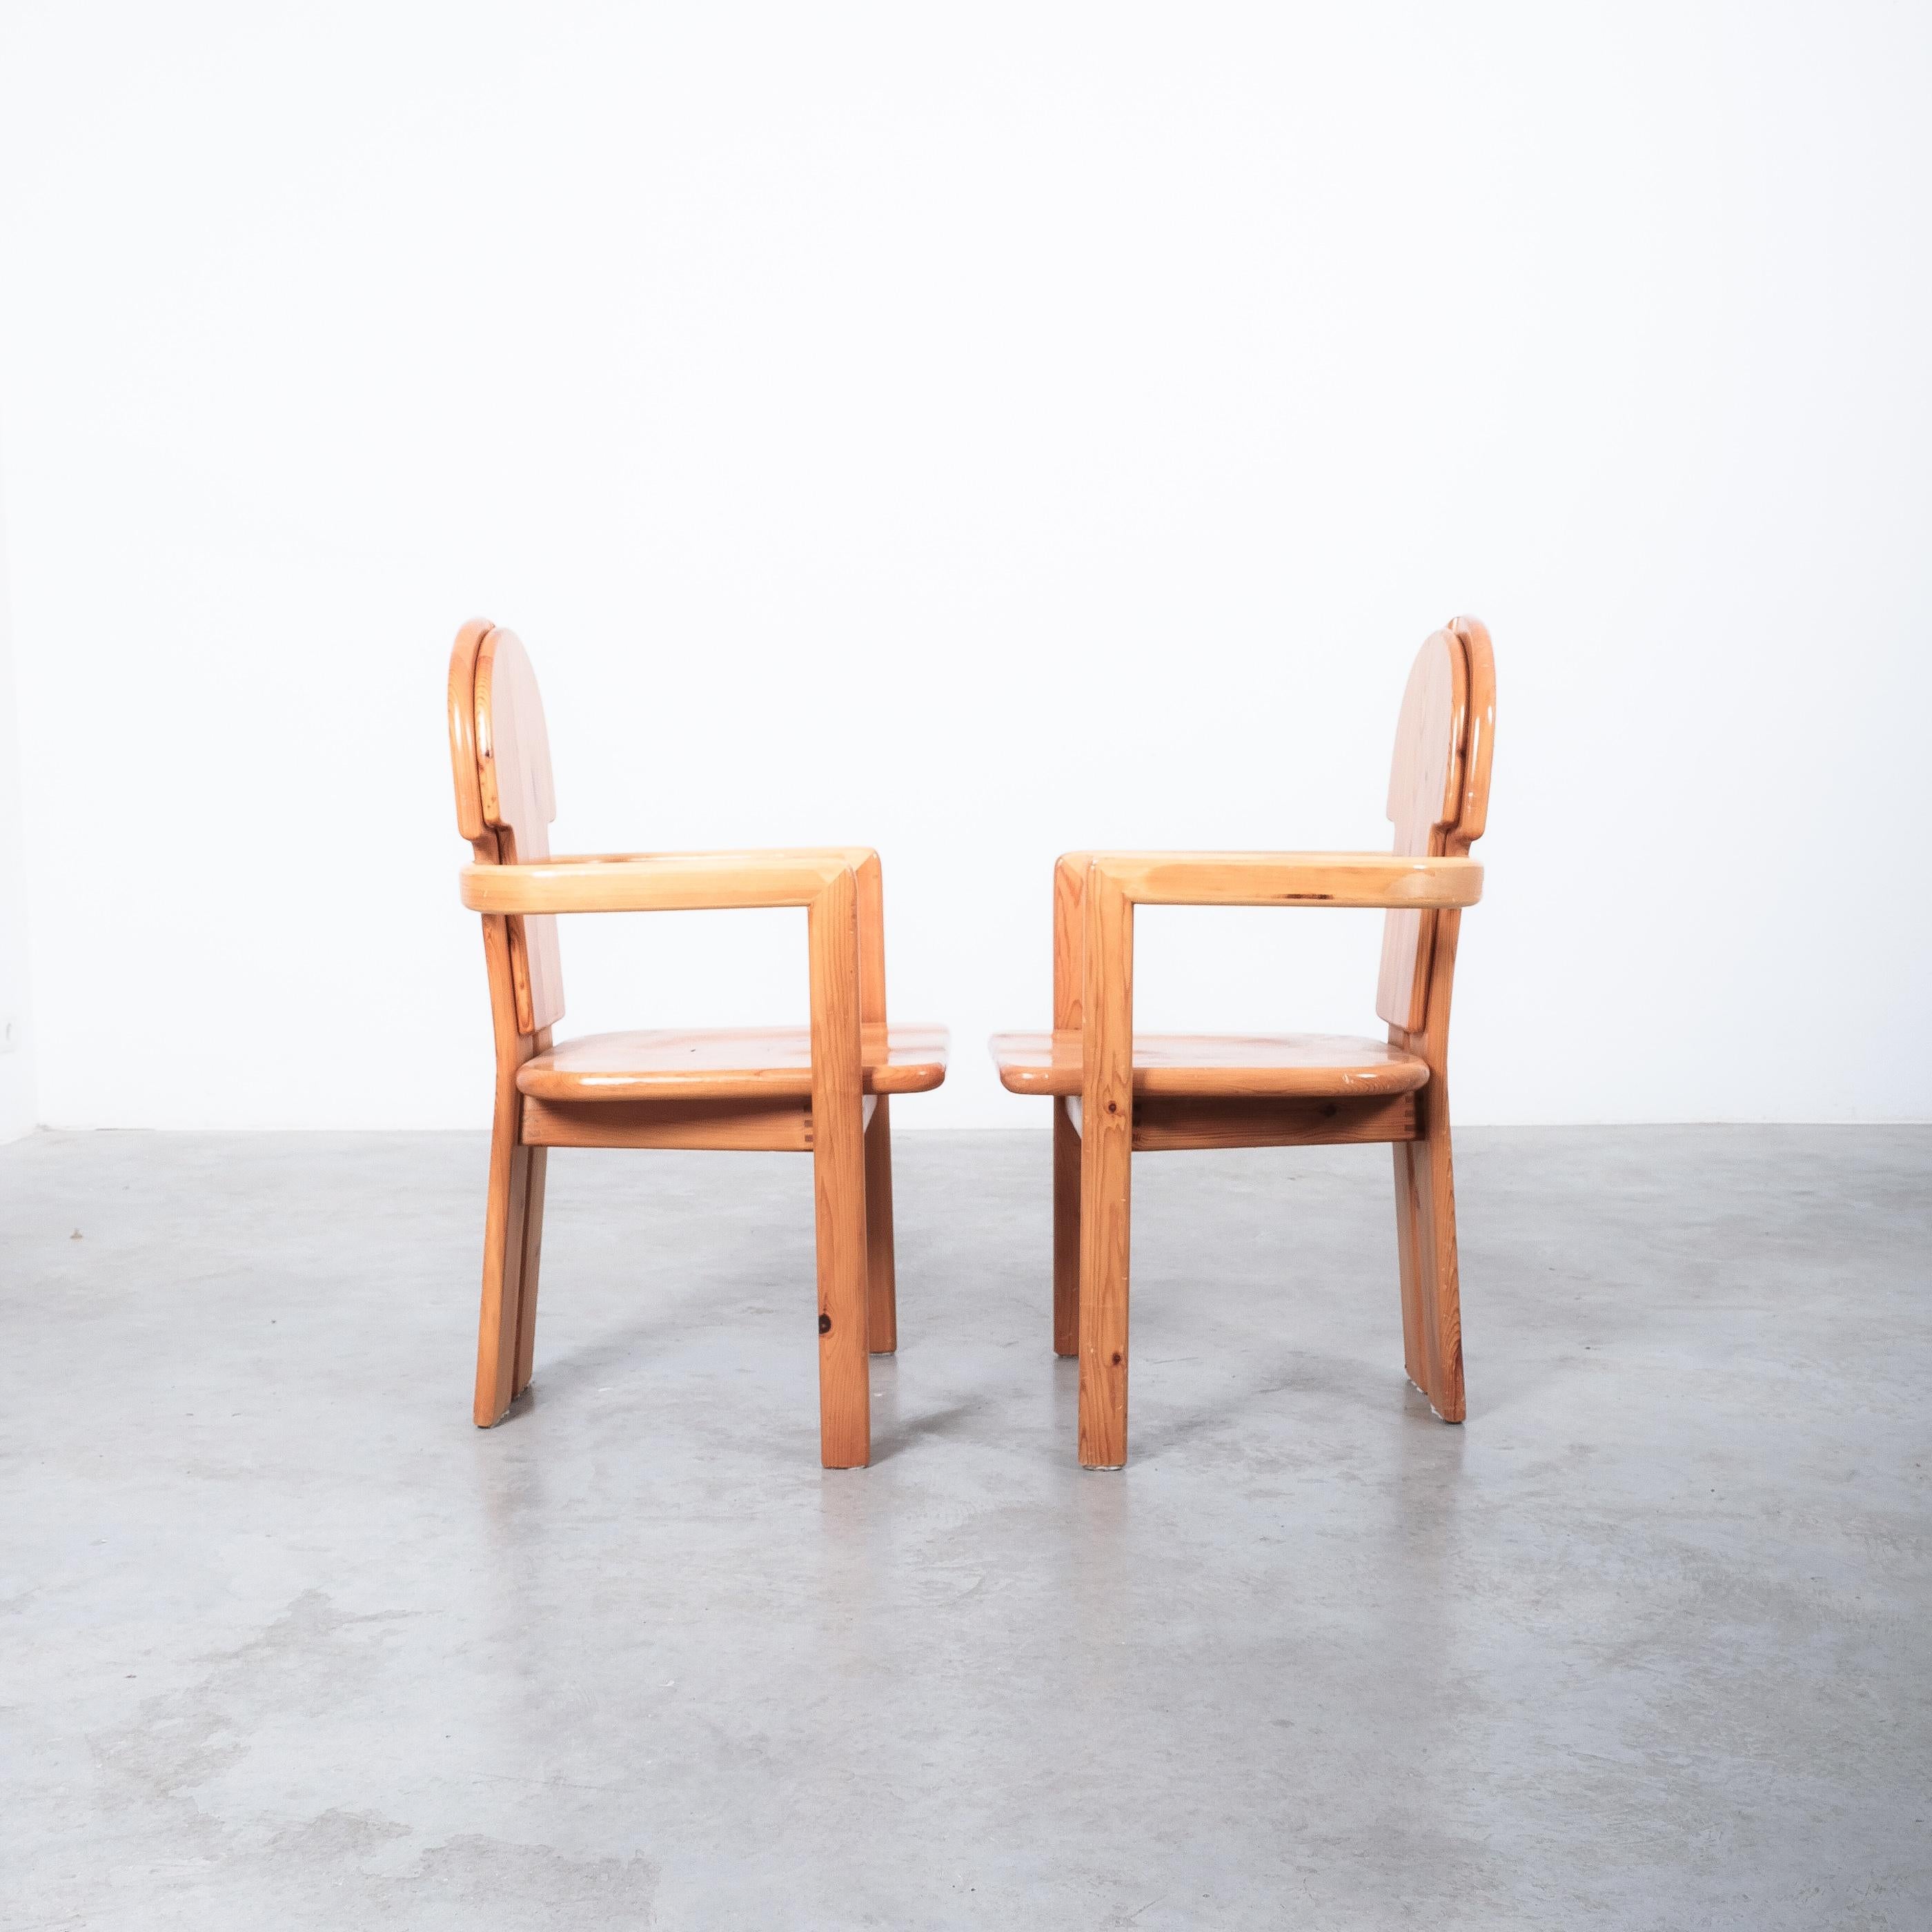 Rainer Daumiller Solid Pine Wood Dining Chairs '2' Danish Design, 1970 For Sale 4